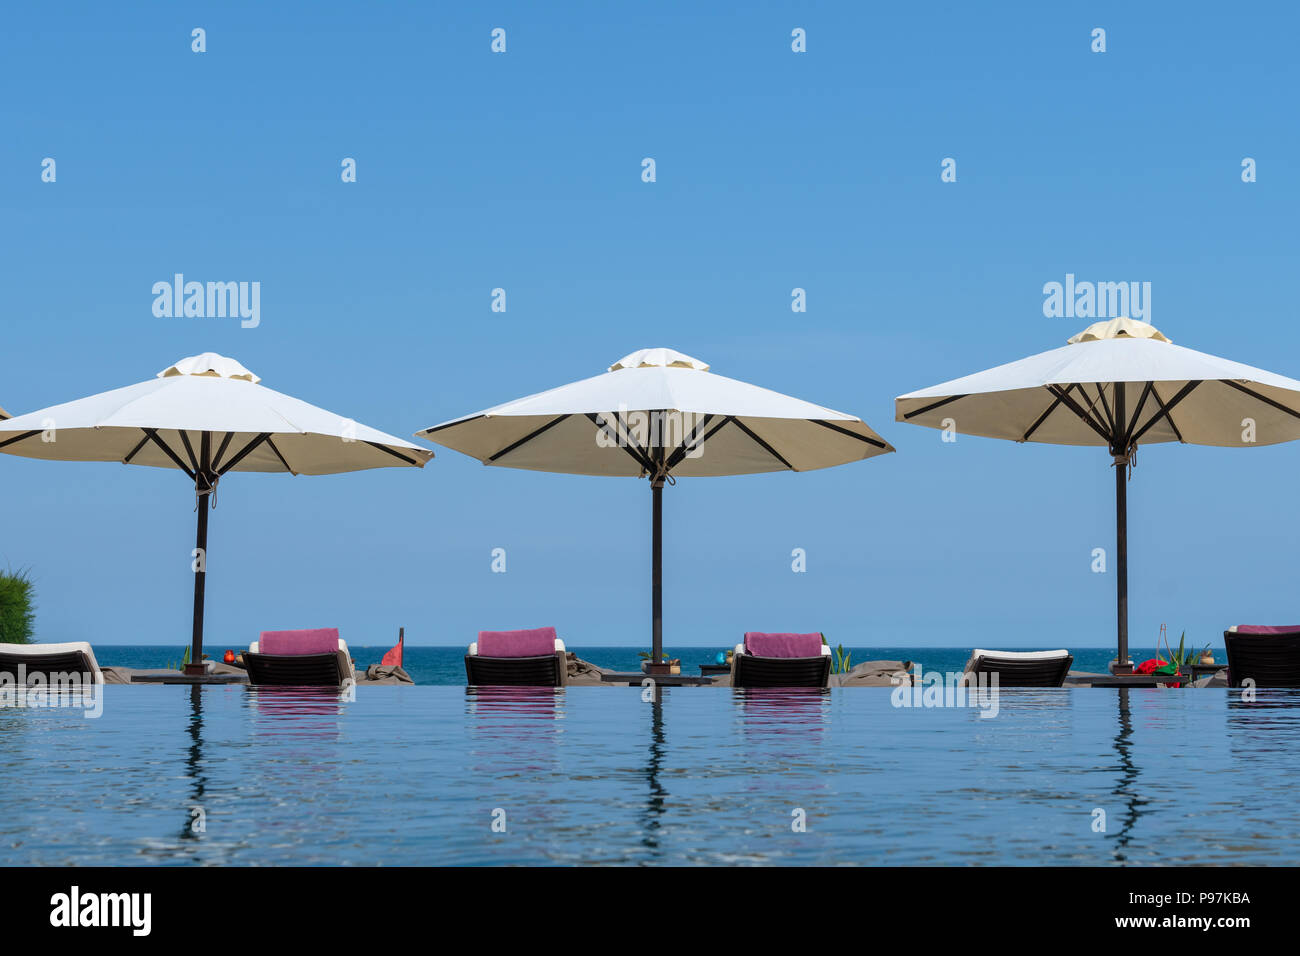 Sun loungers and umbrella shades by the sea Stock Photo